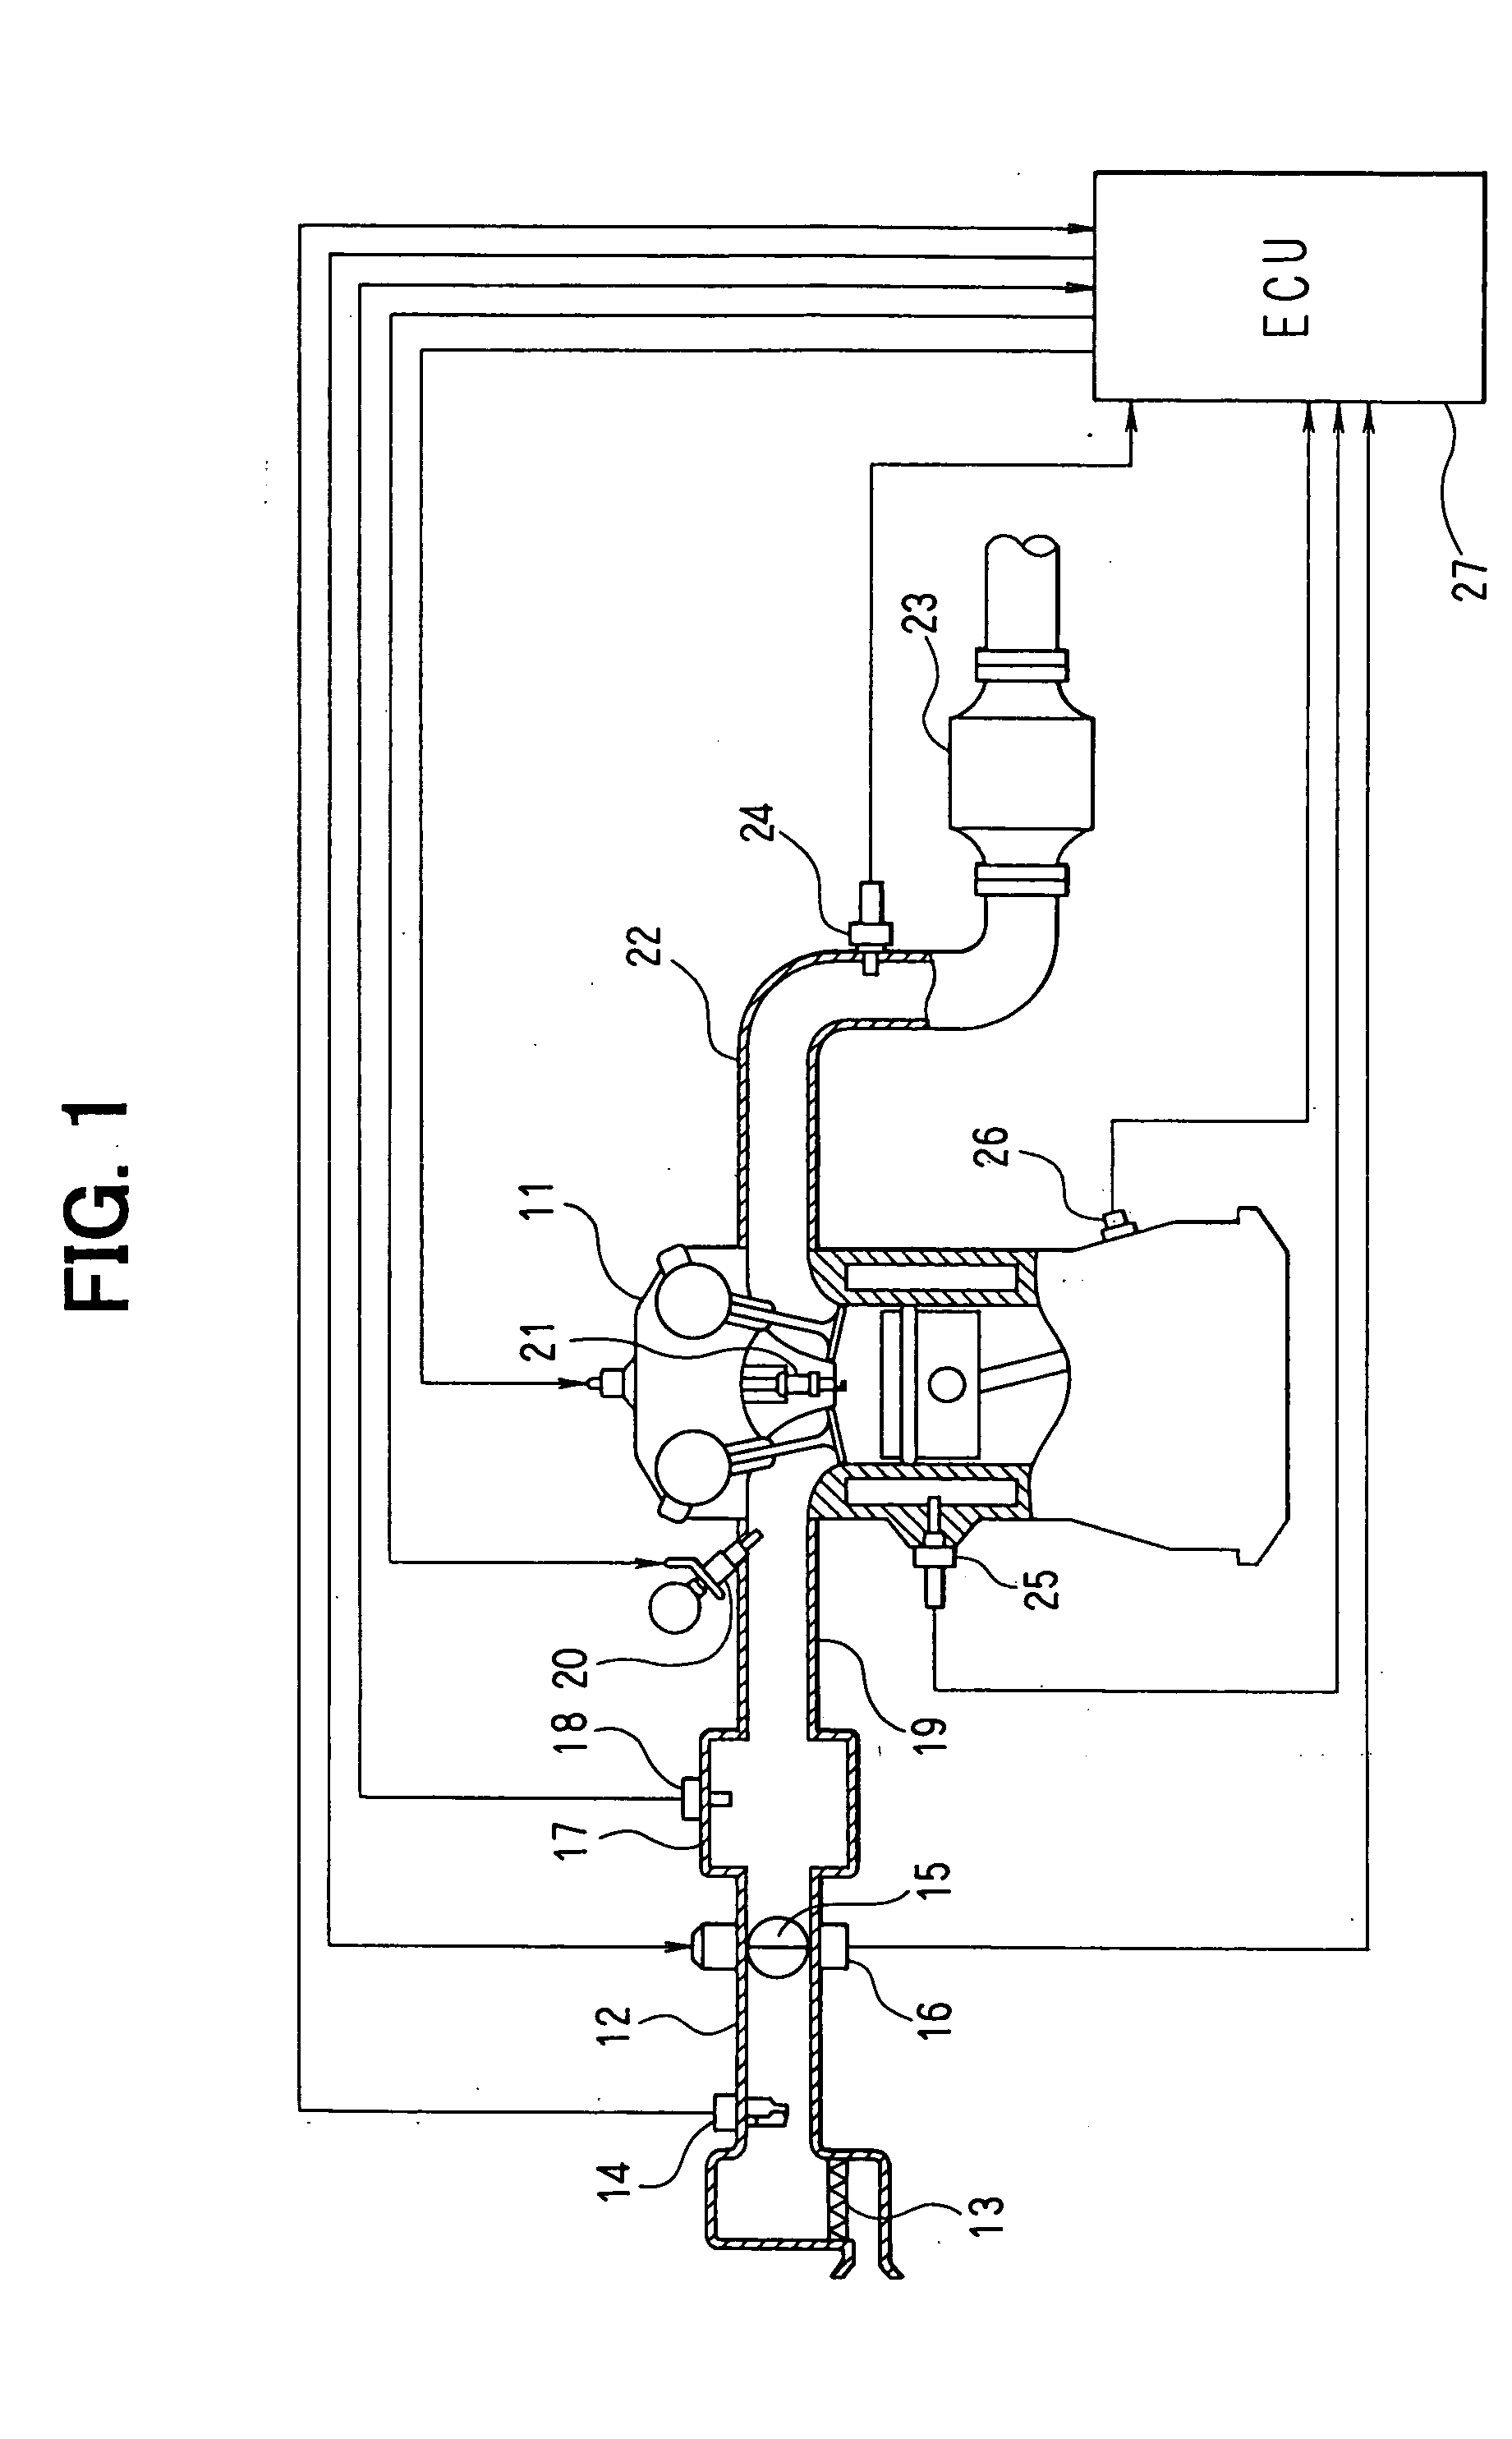 Rapid catalyst warm-up control device for internal combustion engine